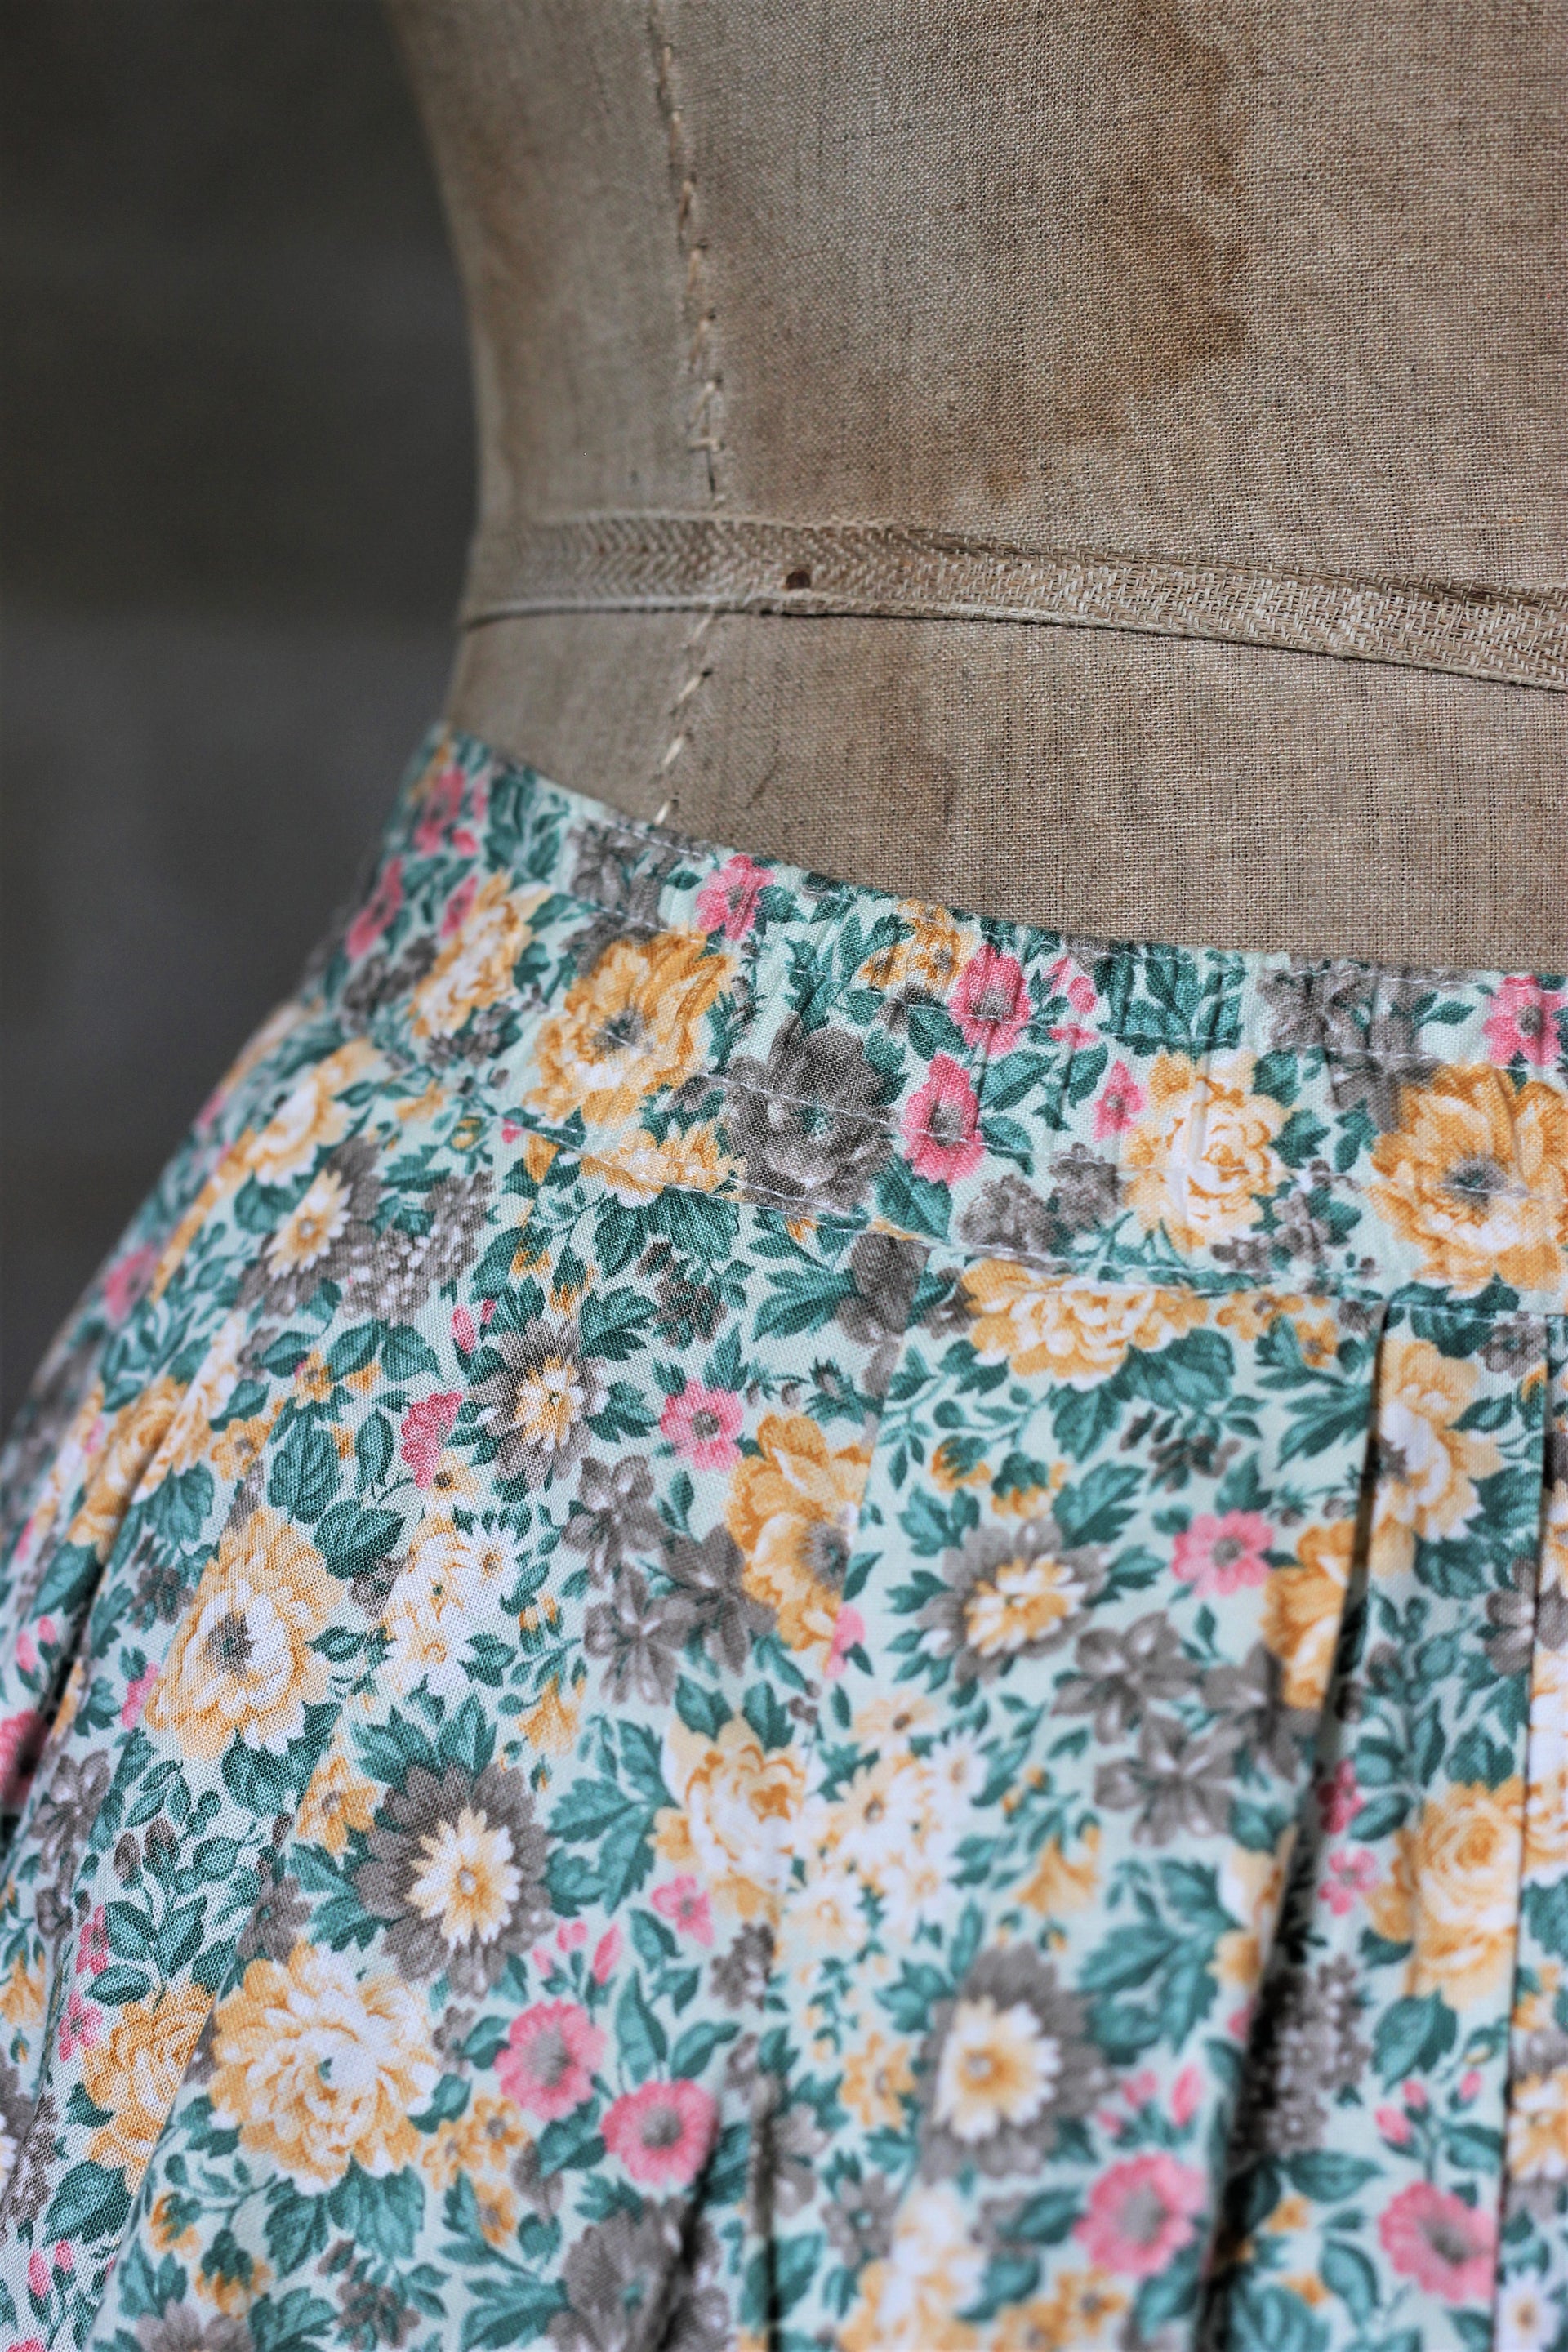 1990s Bavarian Pleated Floral Printed Skirt       S3